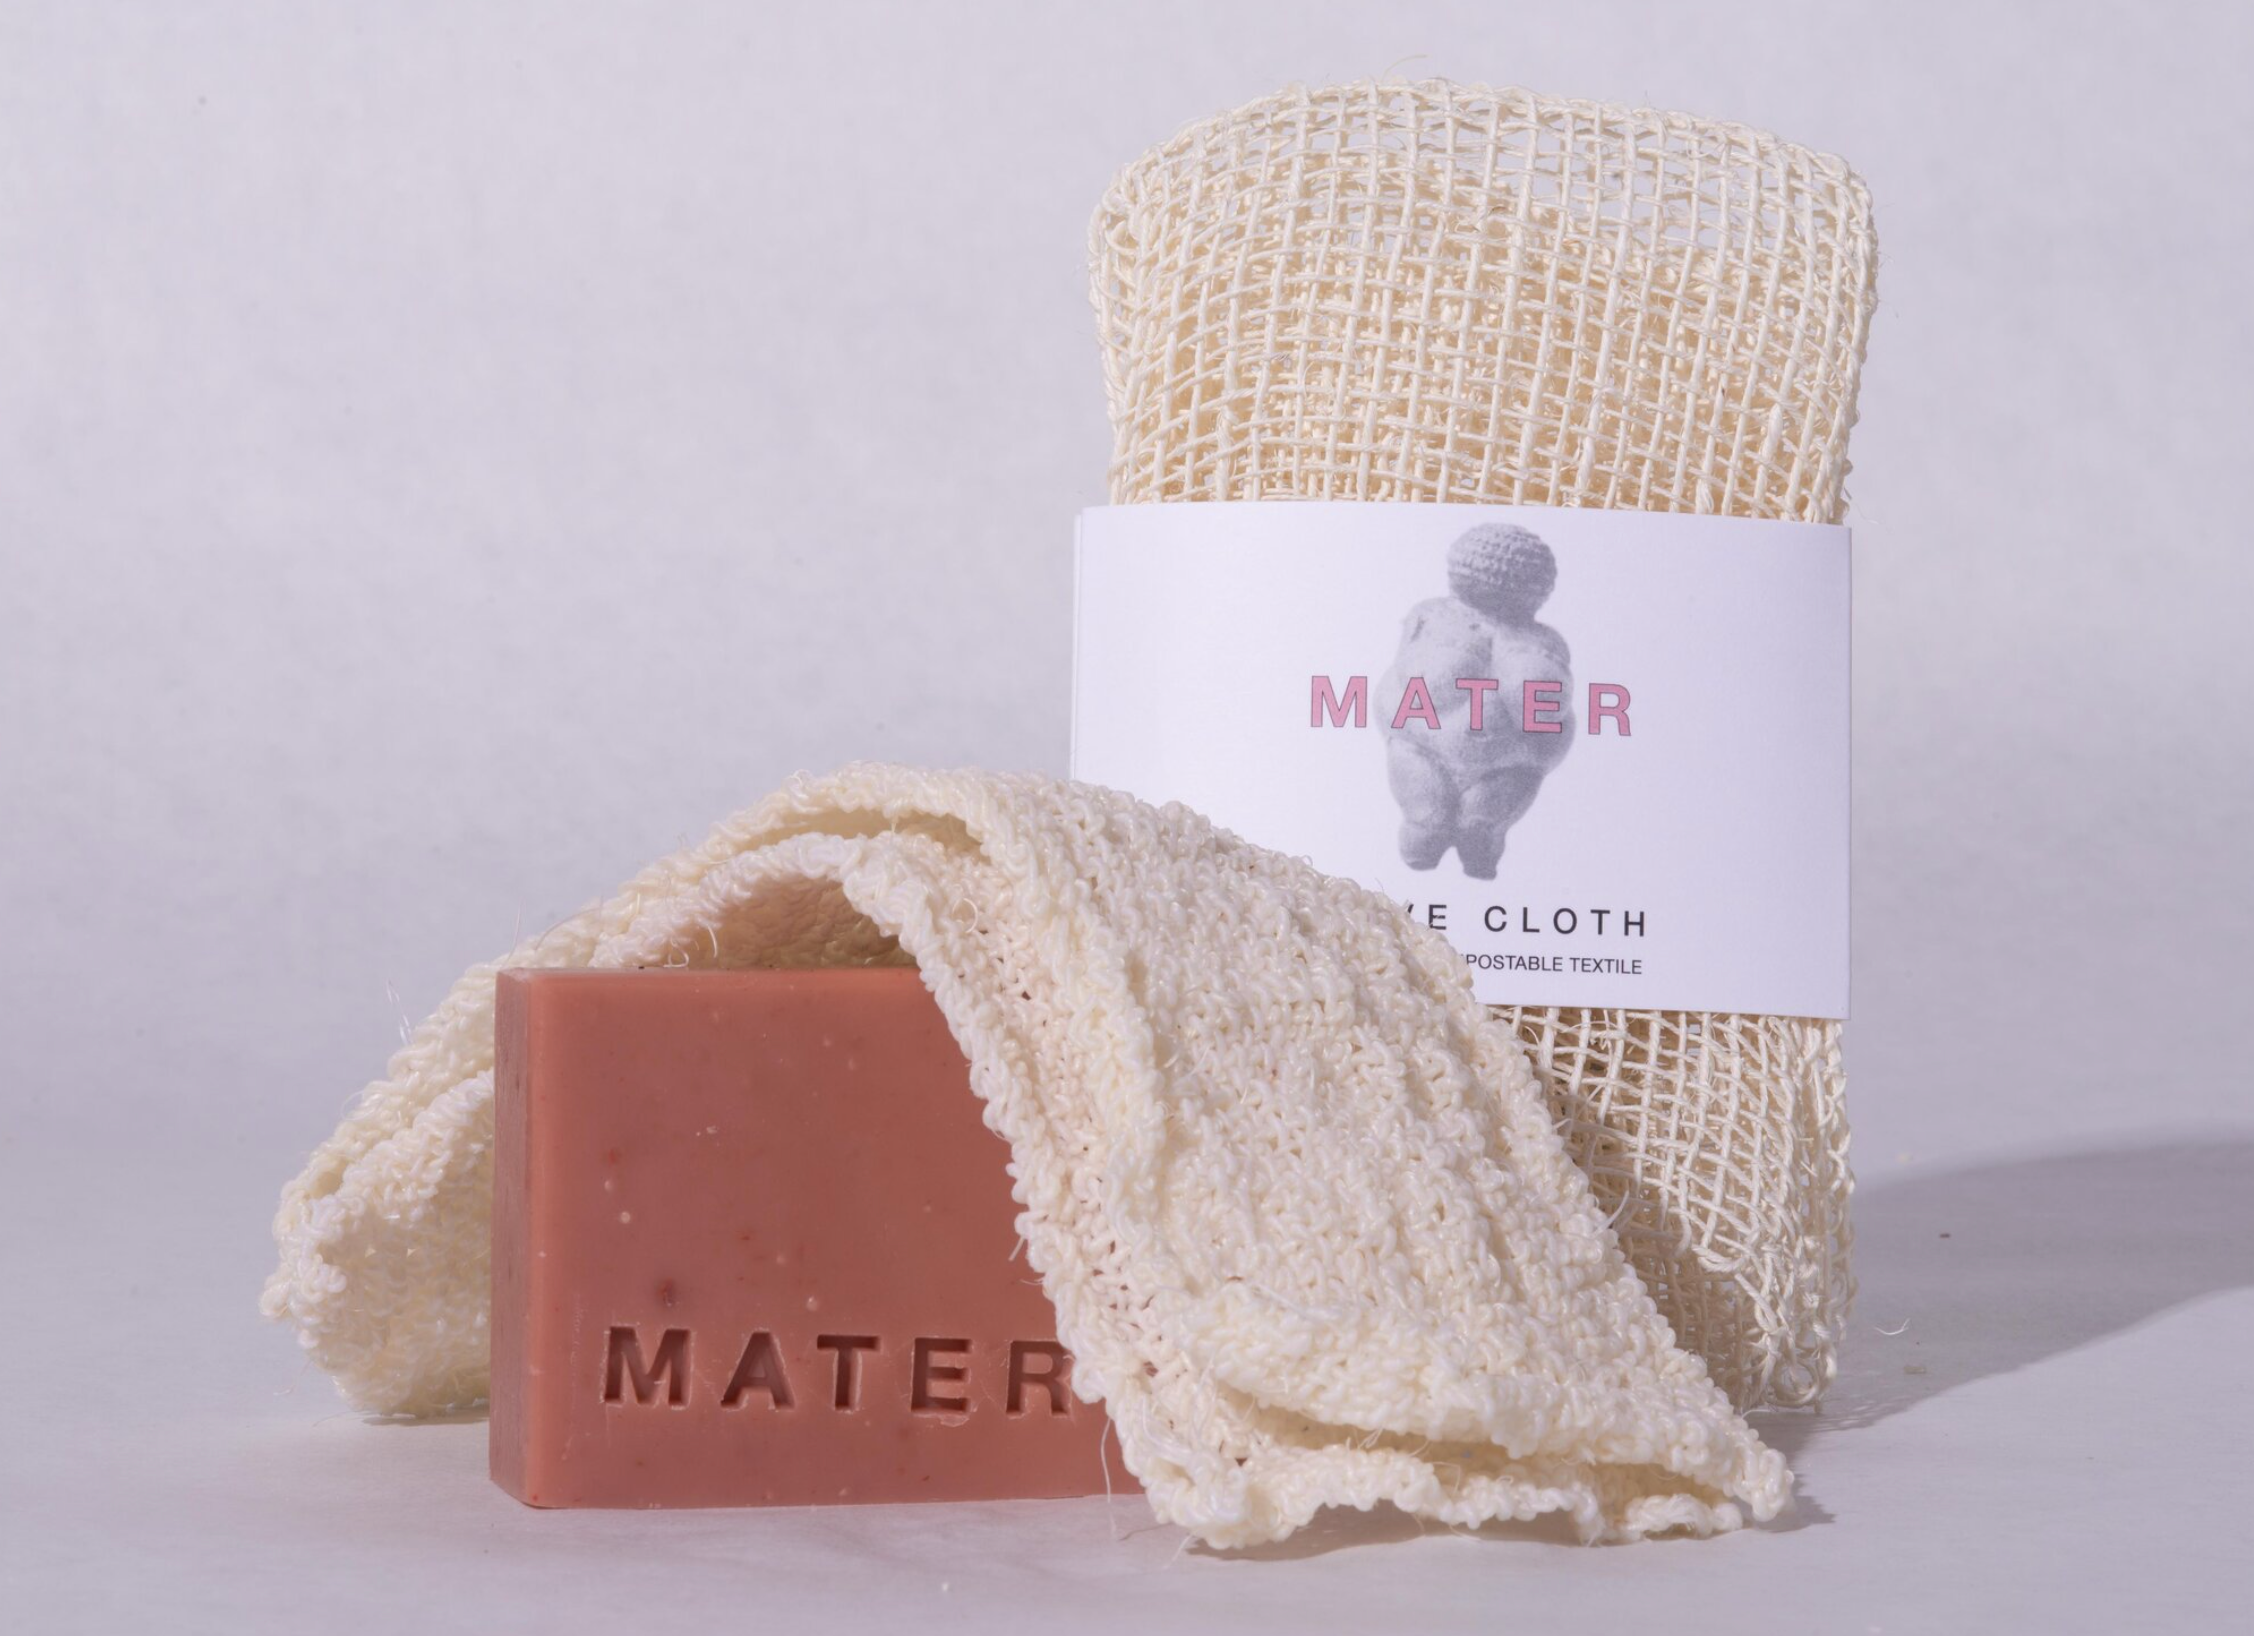 Agave Cloth - Mater Soap